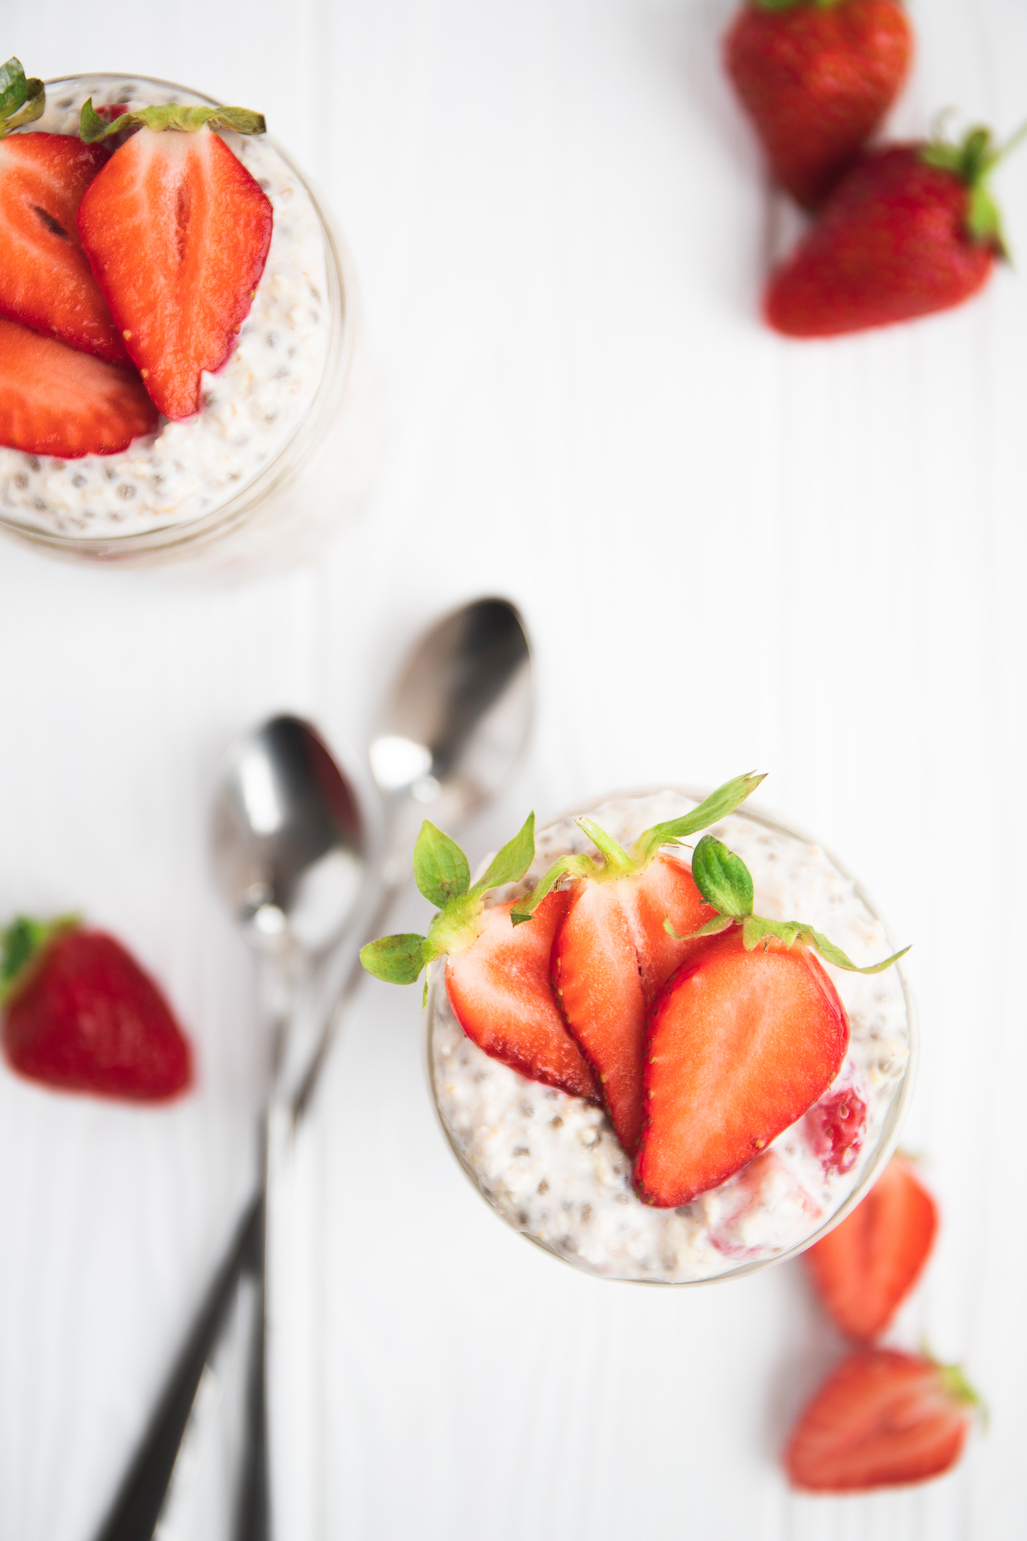 overnight oats topped with strawberries